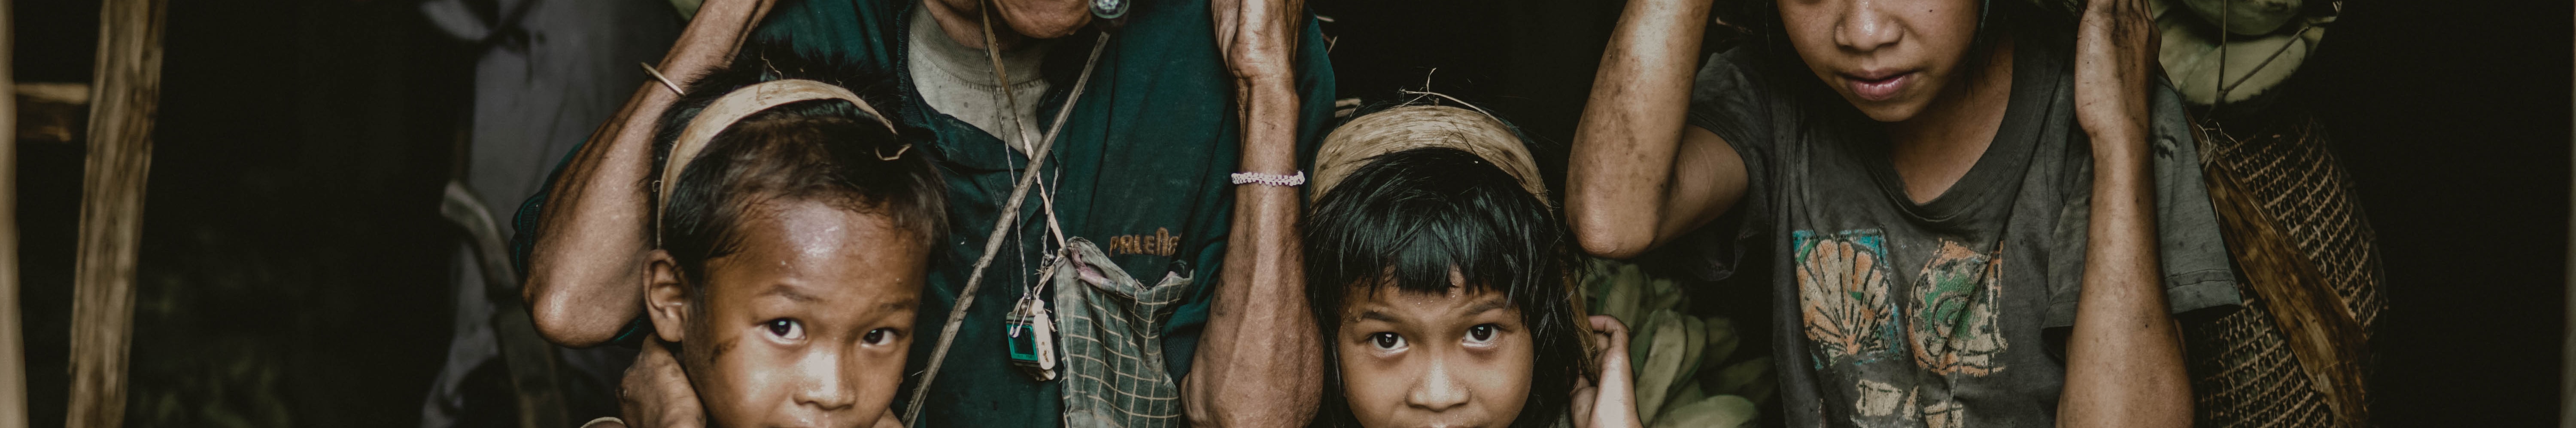 Since 2015, Nestlé has been unable to eliminate child & forced labor in its supply chain